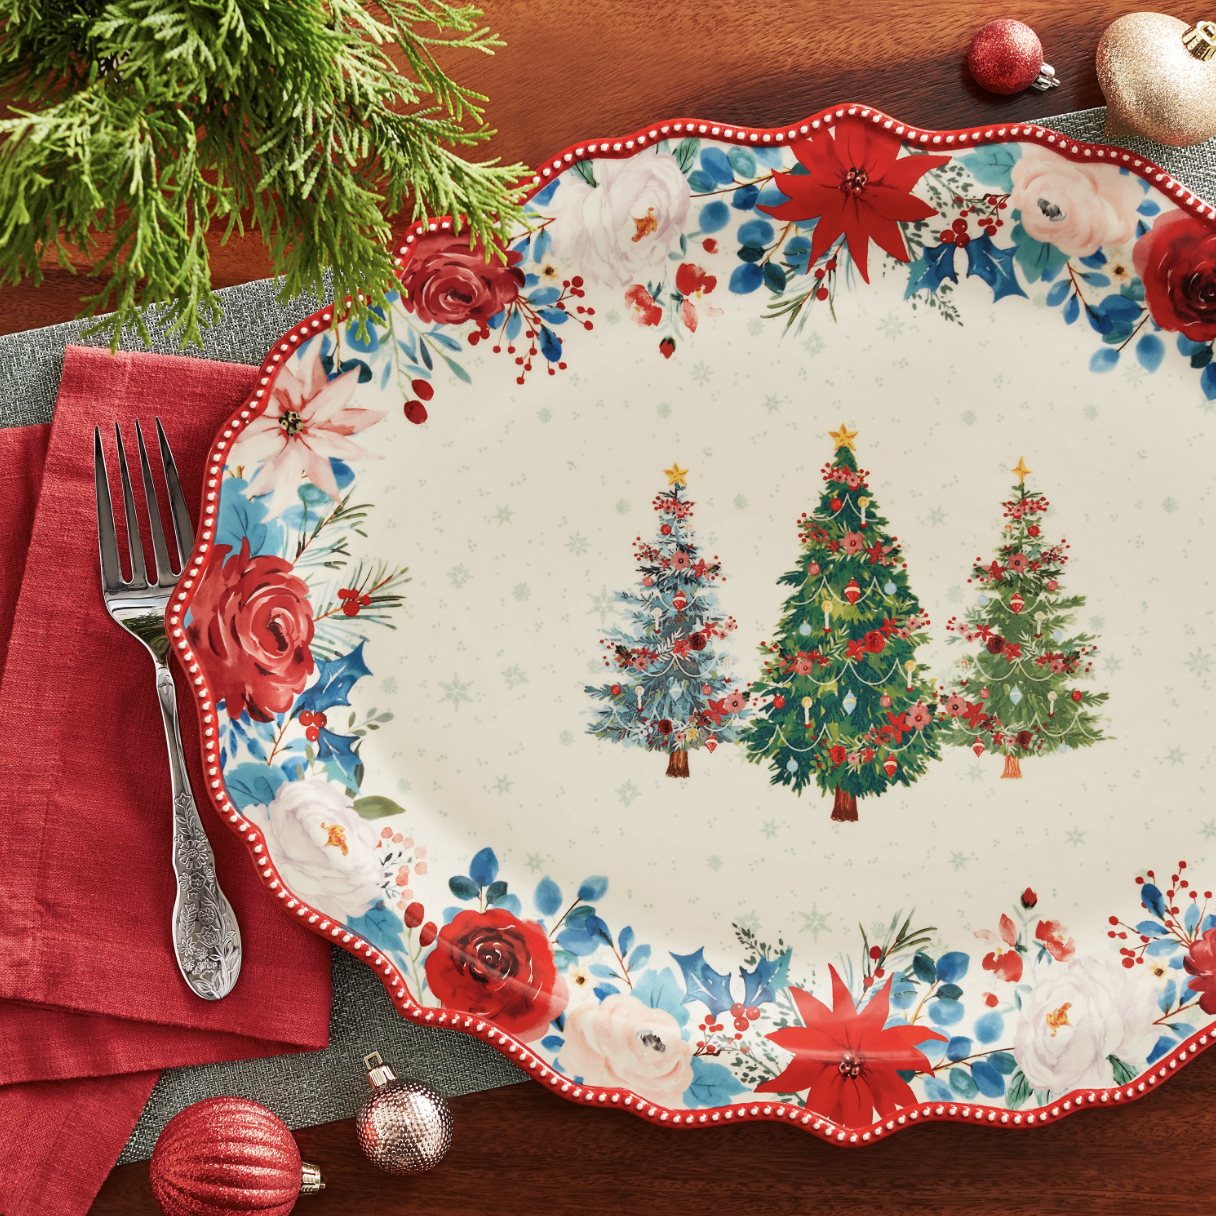 The Pioneer Woman Wishful Winter Ceramic Oval Serving Tray